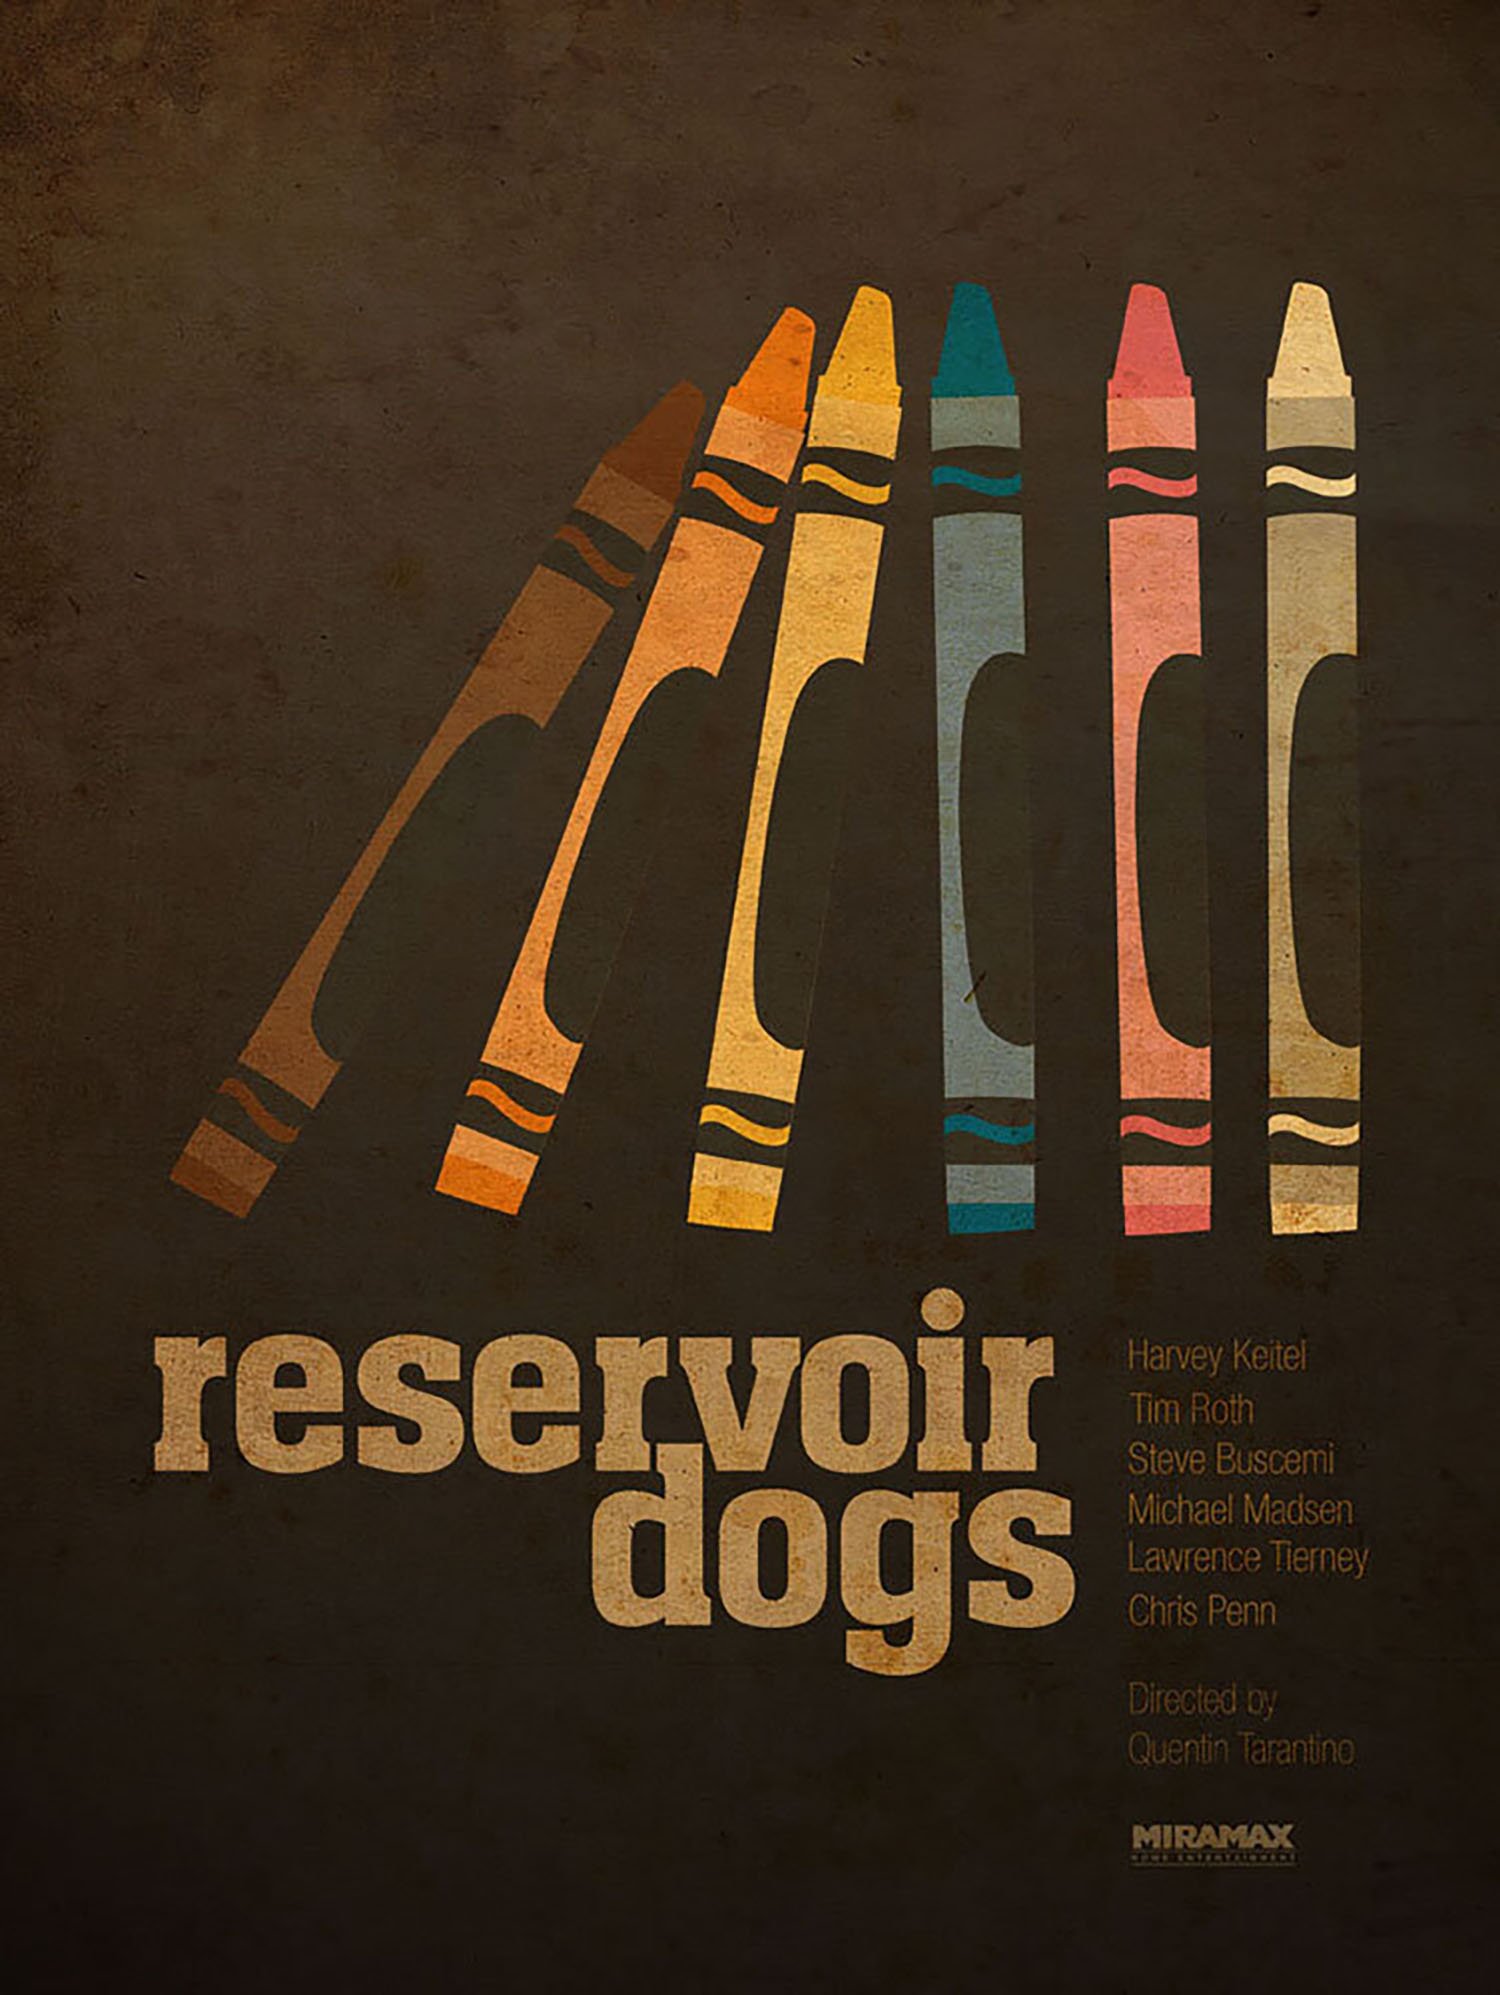 Fan made movie poster for Reservoir Dogs by Ibraheem Youssef.